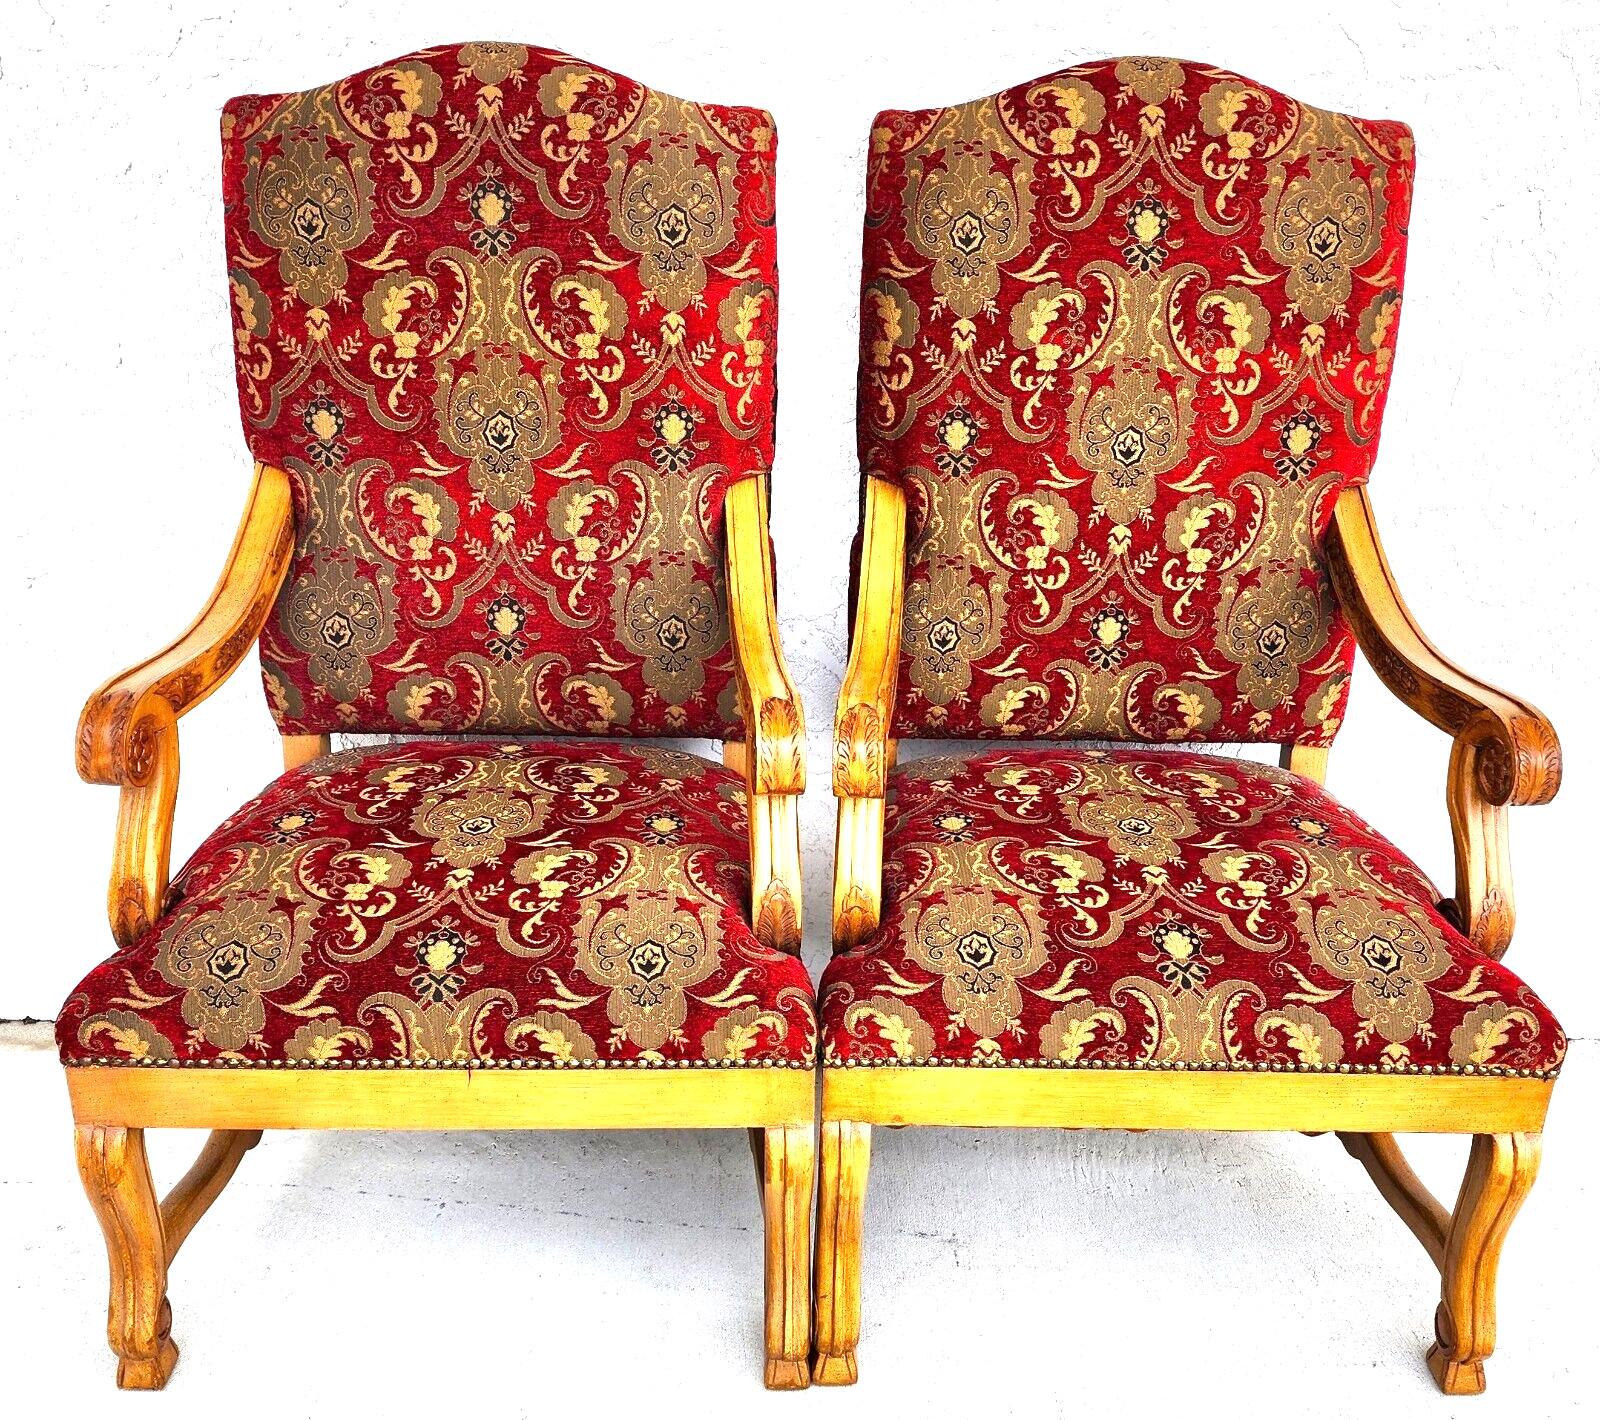 For FULL item description click on CONTINUE READING at the bottom of this page.

Offering One Of Our Recent Palm Beach Estate Fine Furniture Acquisitions Of A
Pair of Vintage Accent Armchairs Italian Venetian Style By ANDRE